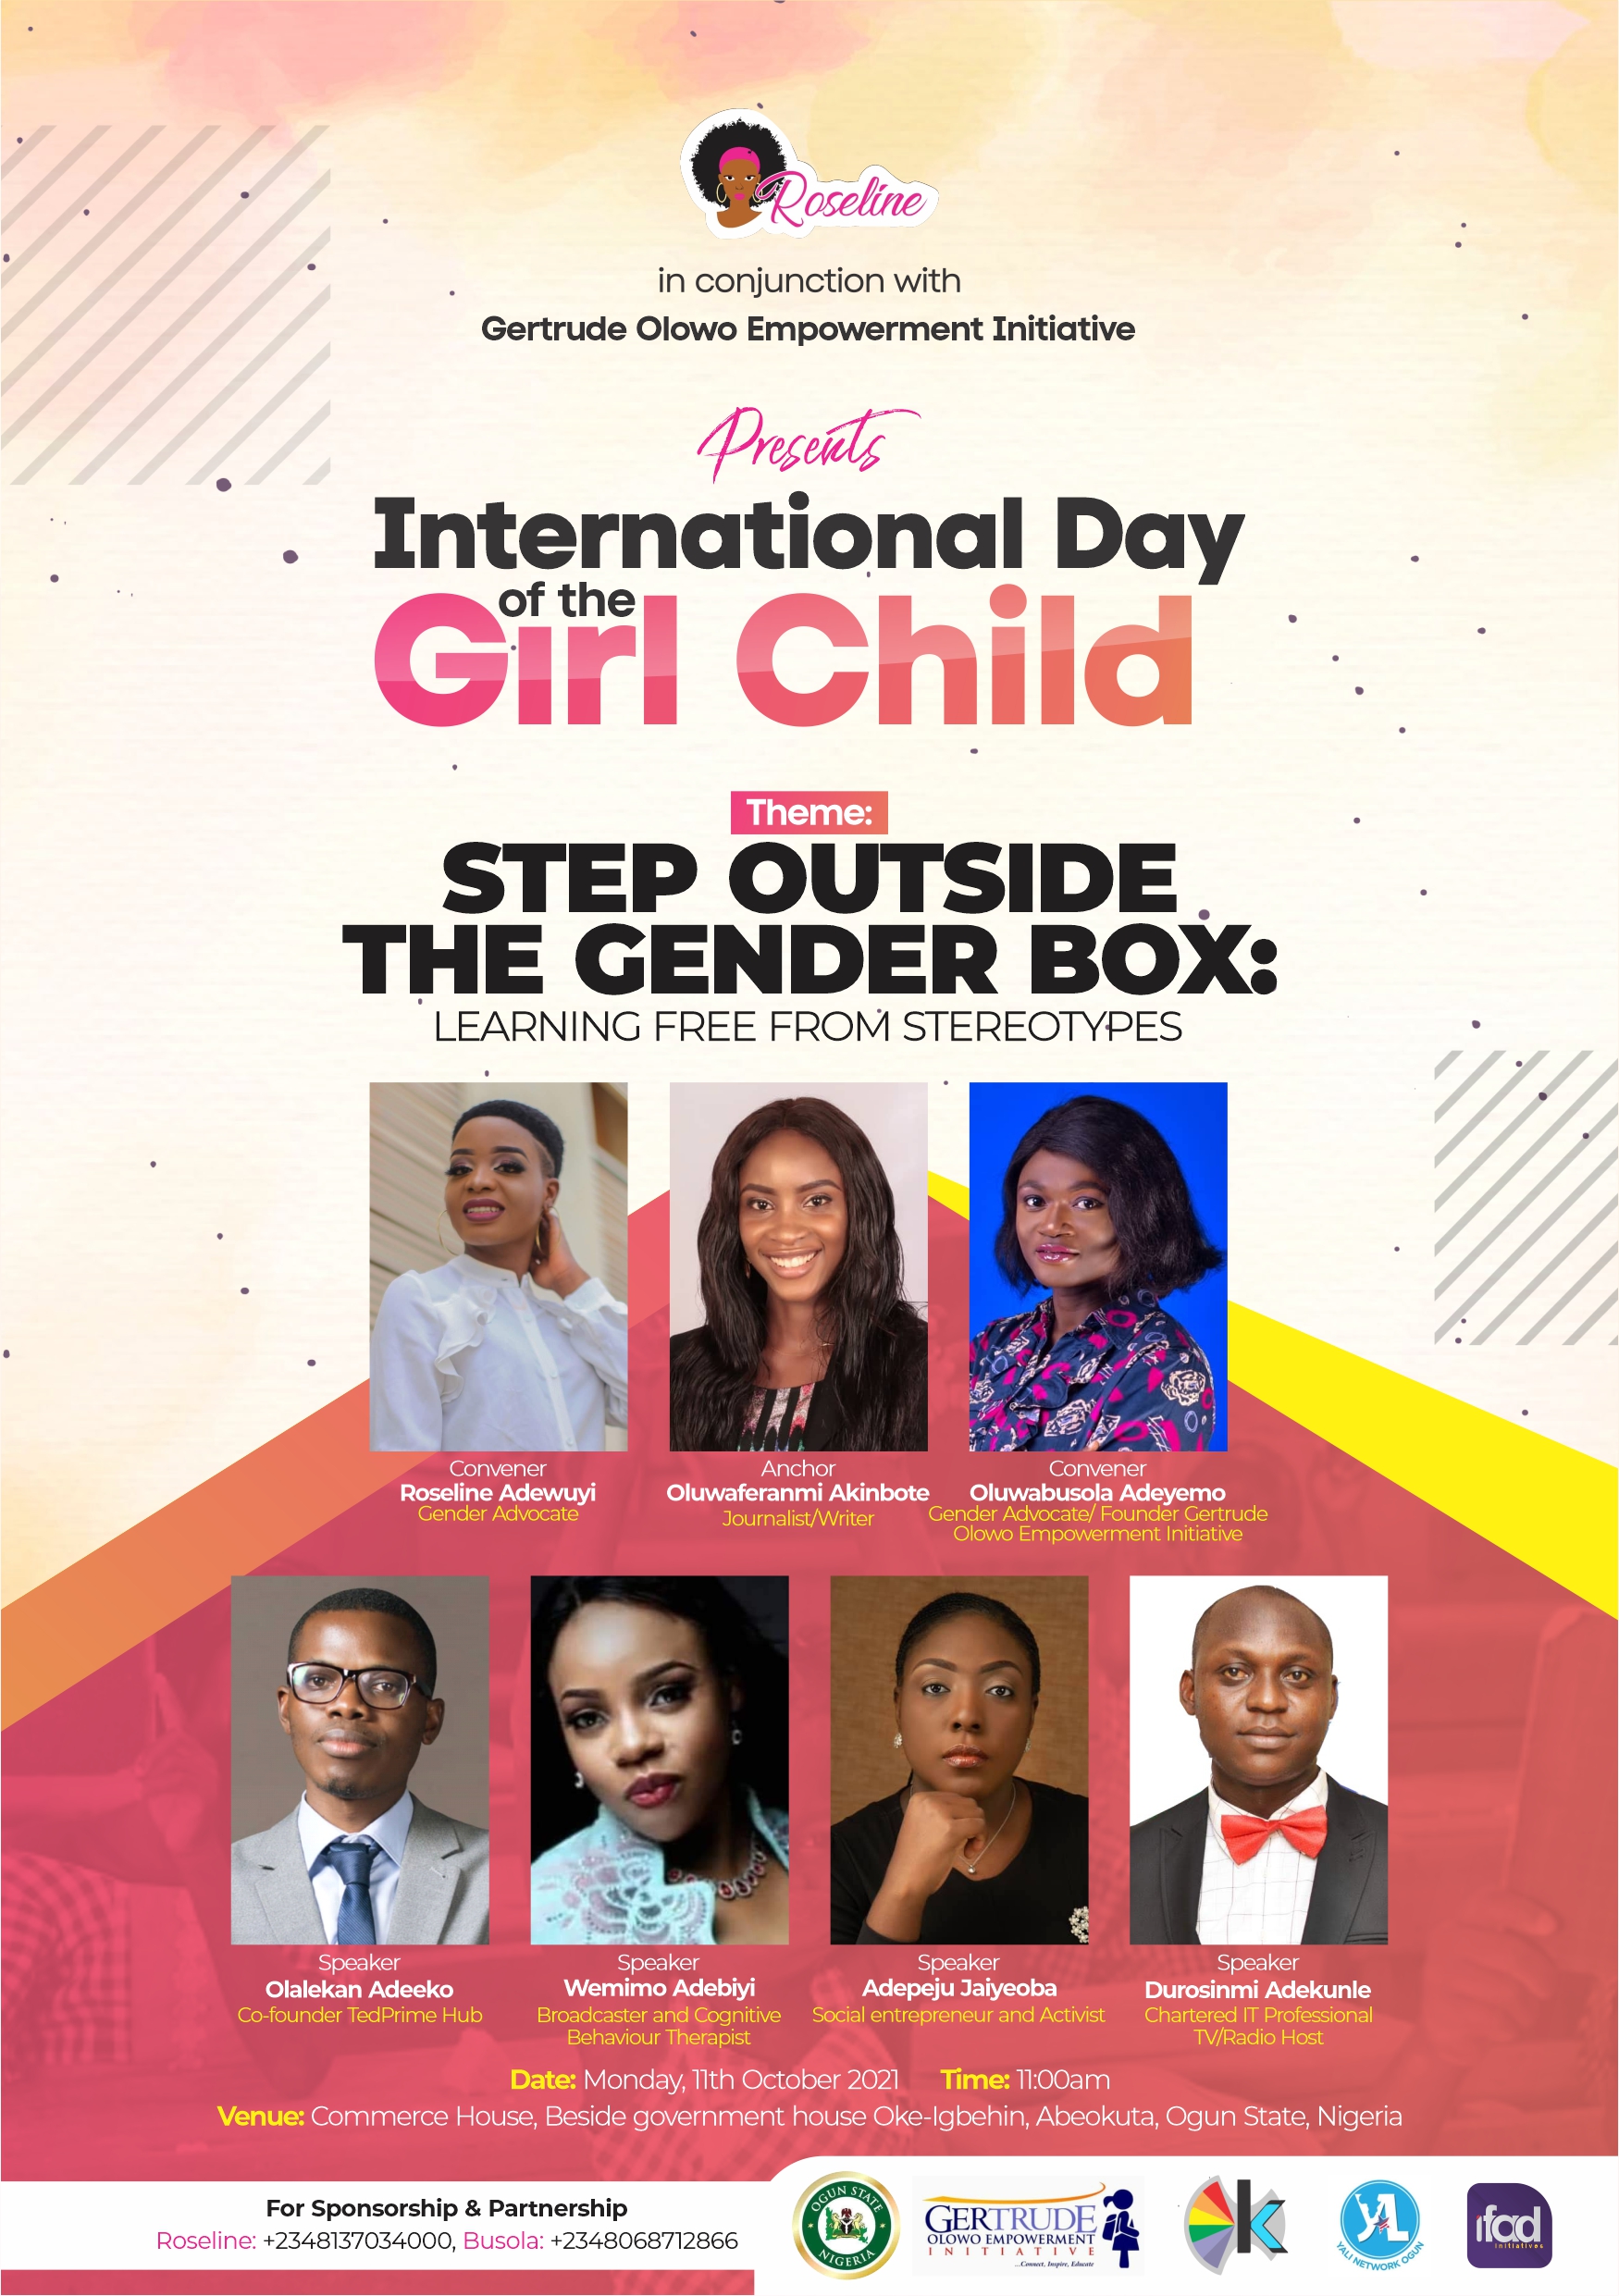 International Day of the Girl Child 10 Day Countdown 2021!